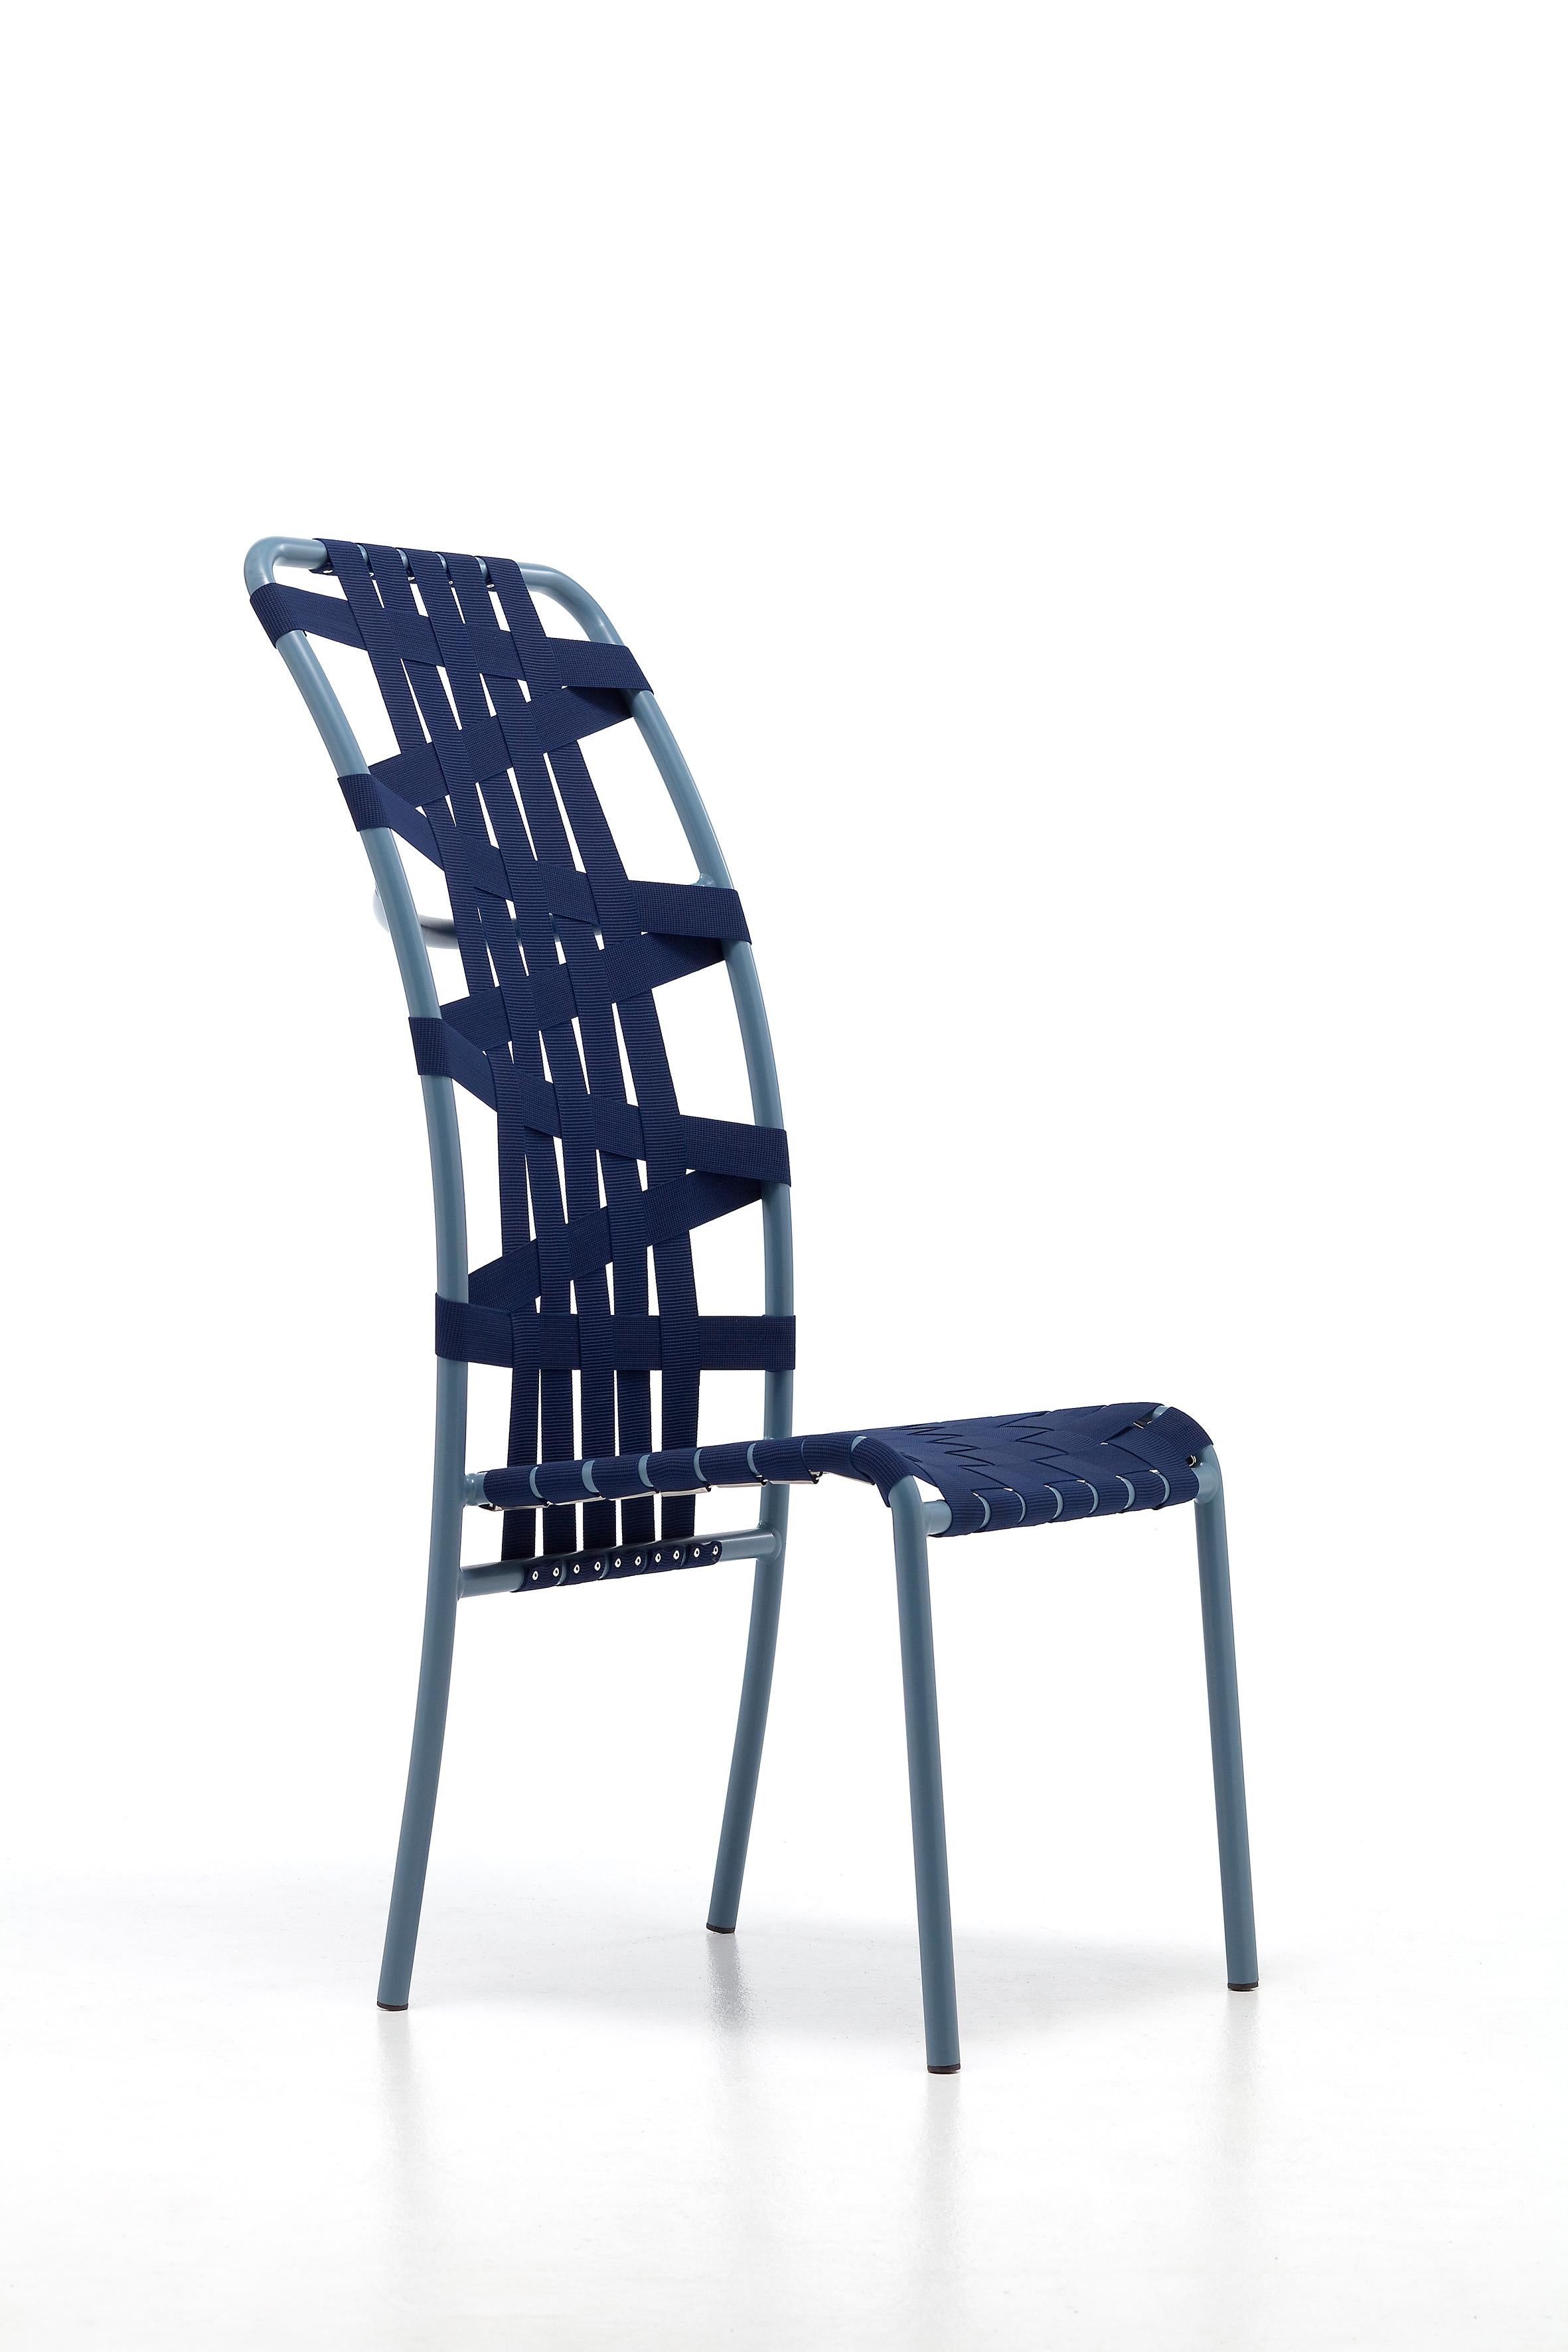 The stackable chair Inout 855 is characterised by an essential aesthetic enhanced by a high backrest. It develops around a light structure in white, grey or sage painted tubular aluminium, an ecological material, unique for its technical qualities.